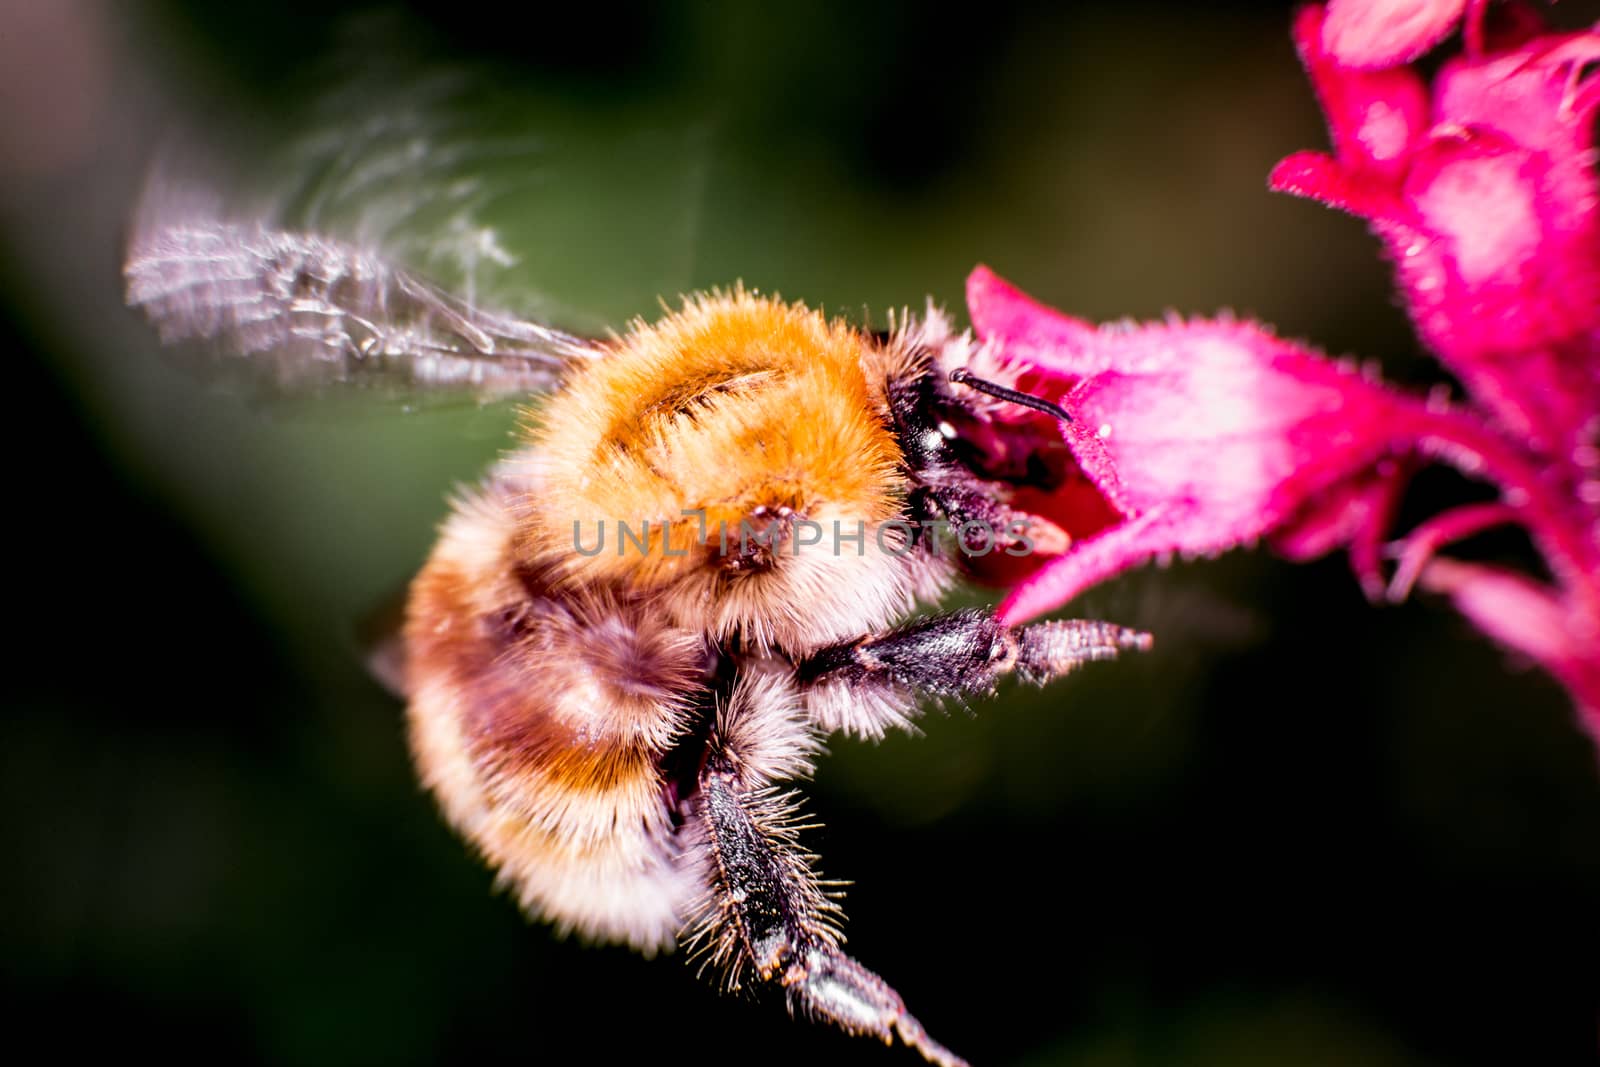 Bumble bee by thomas_males